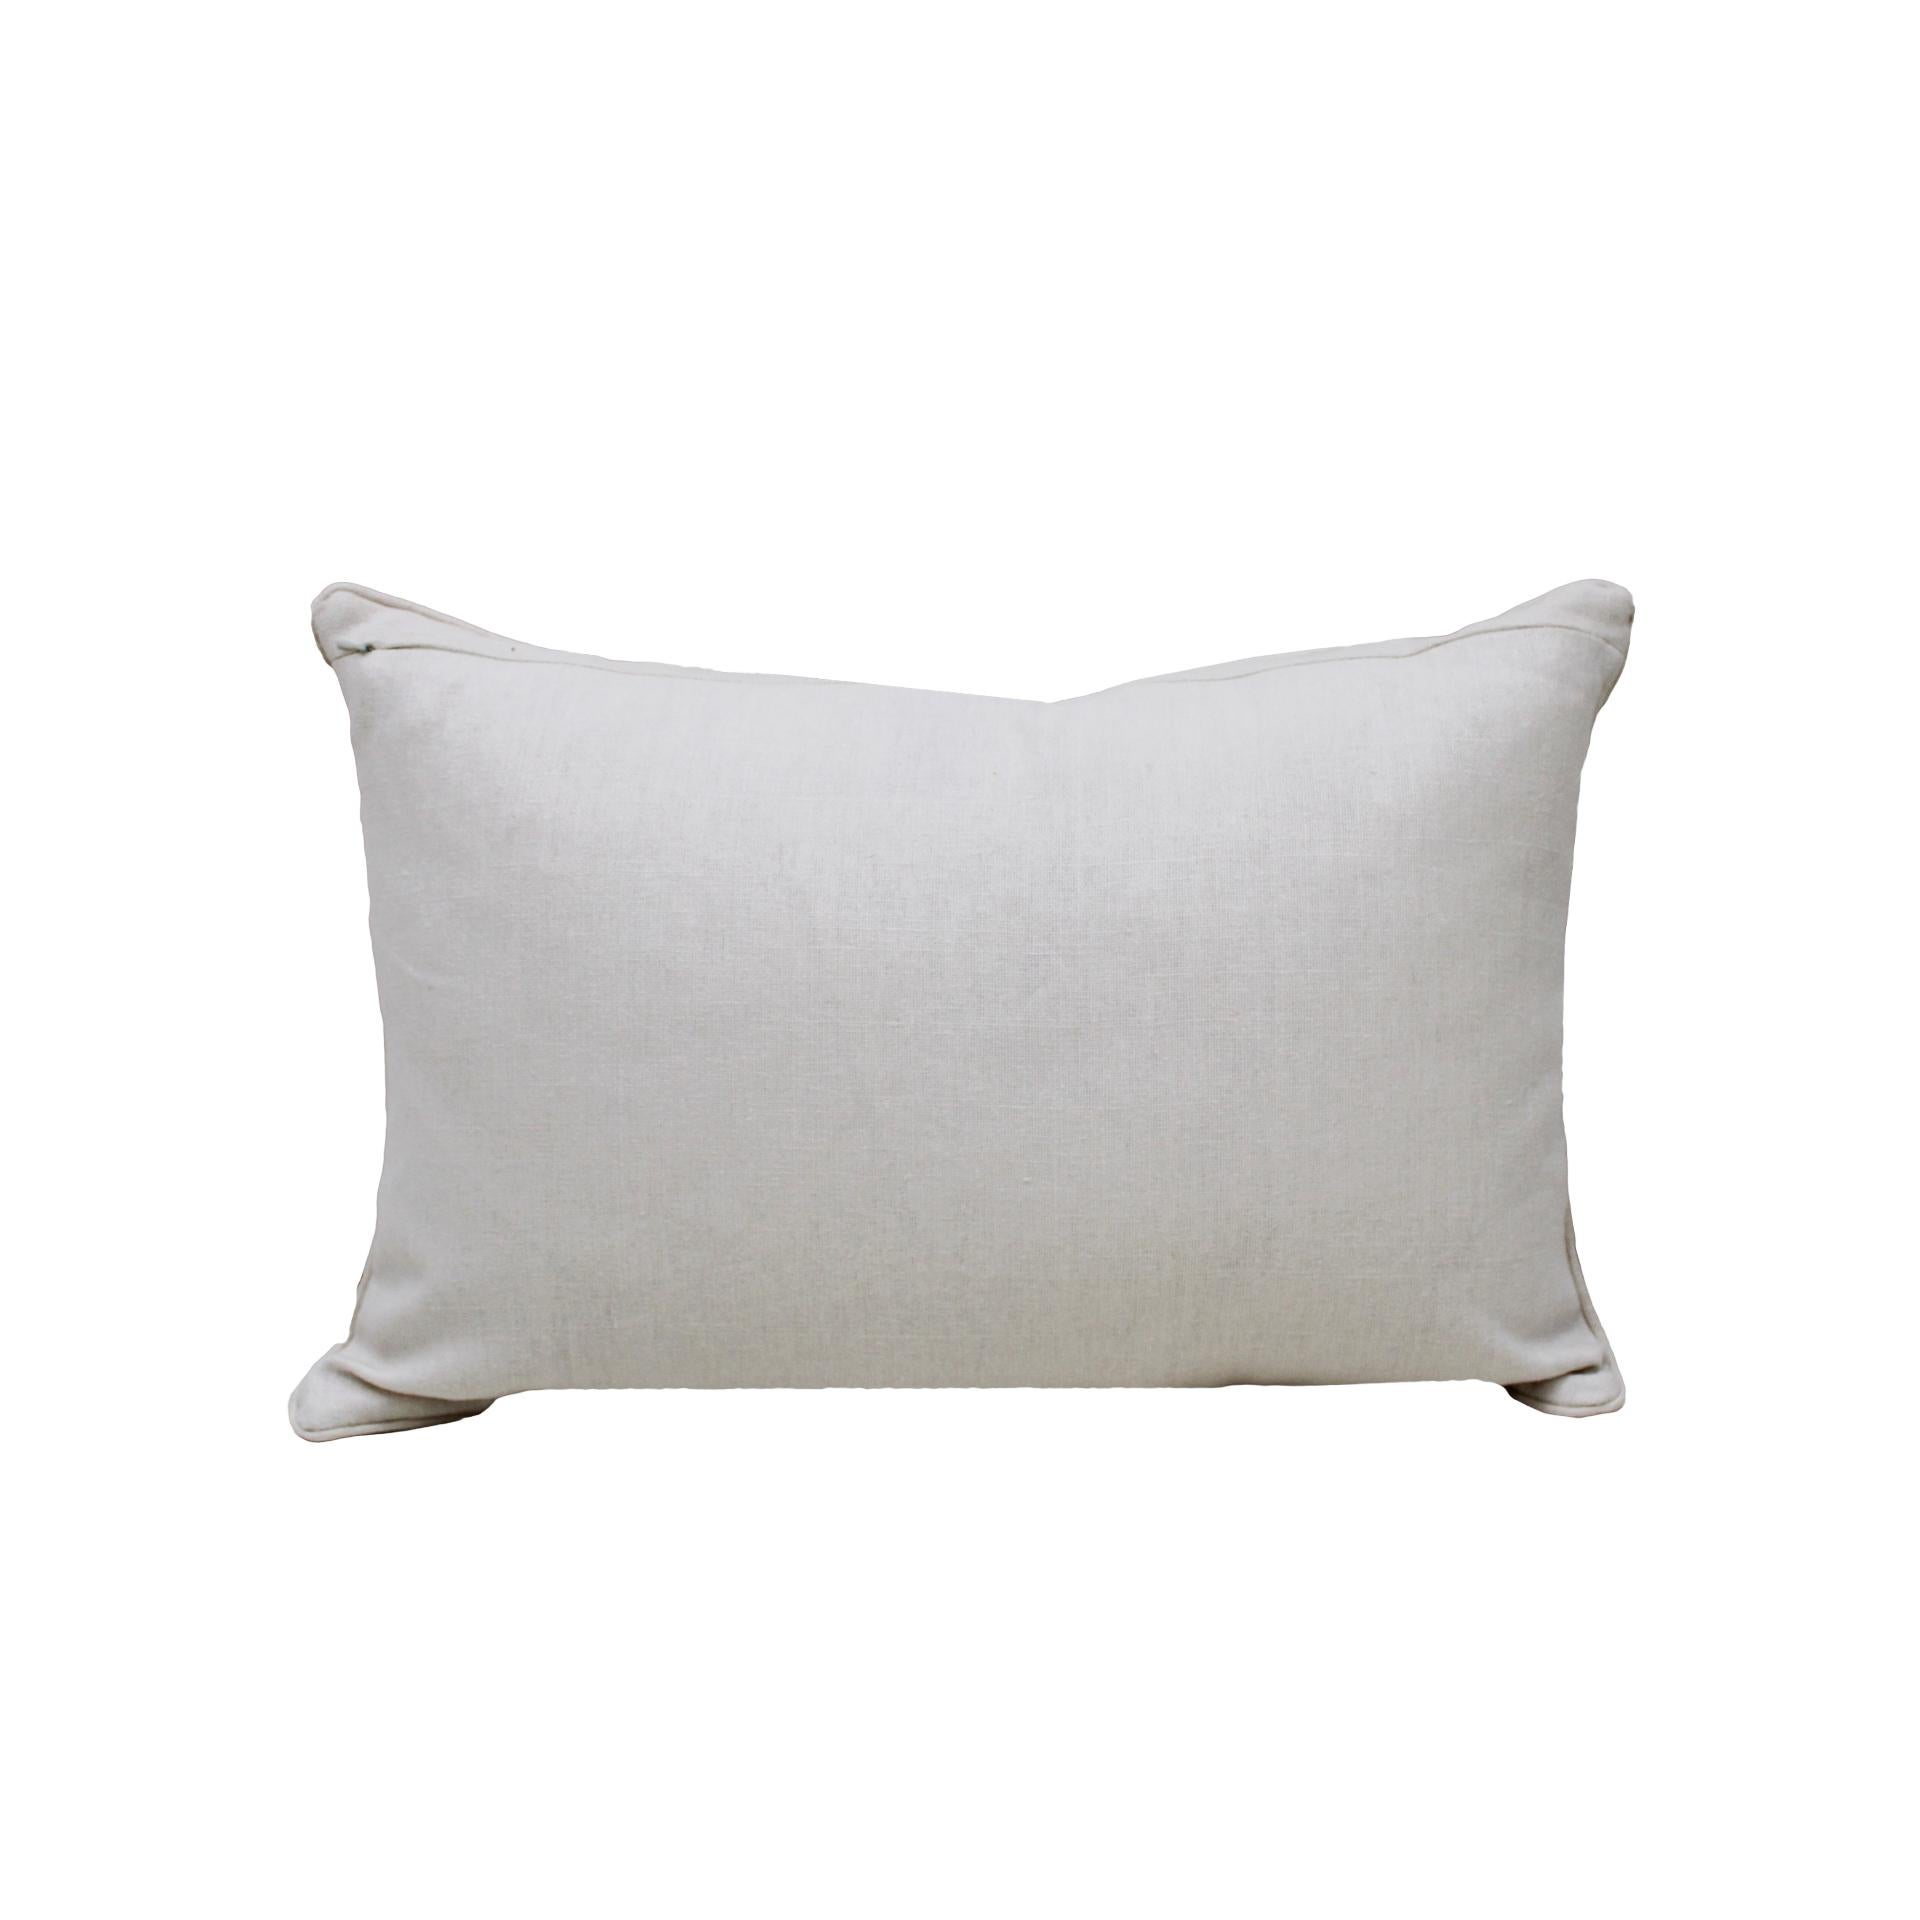 Linen cushion in sand linen with abstract rectangles and back in white linen.
Hidden zip. Filling included.

Every item LA Studio offers is checked by our team of 10 craftsmen in our in-house workshop. Special restoration or reupholstery requests